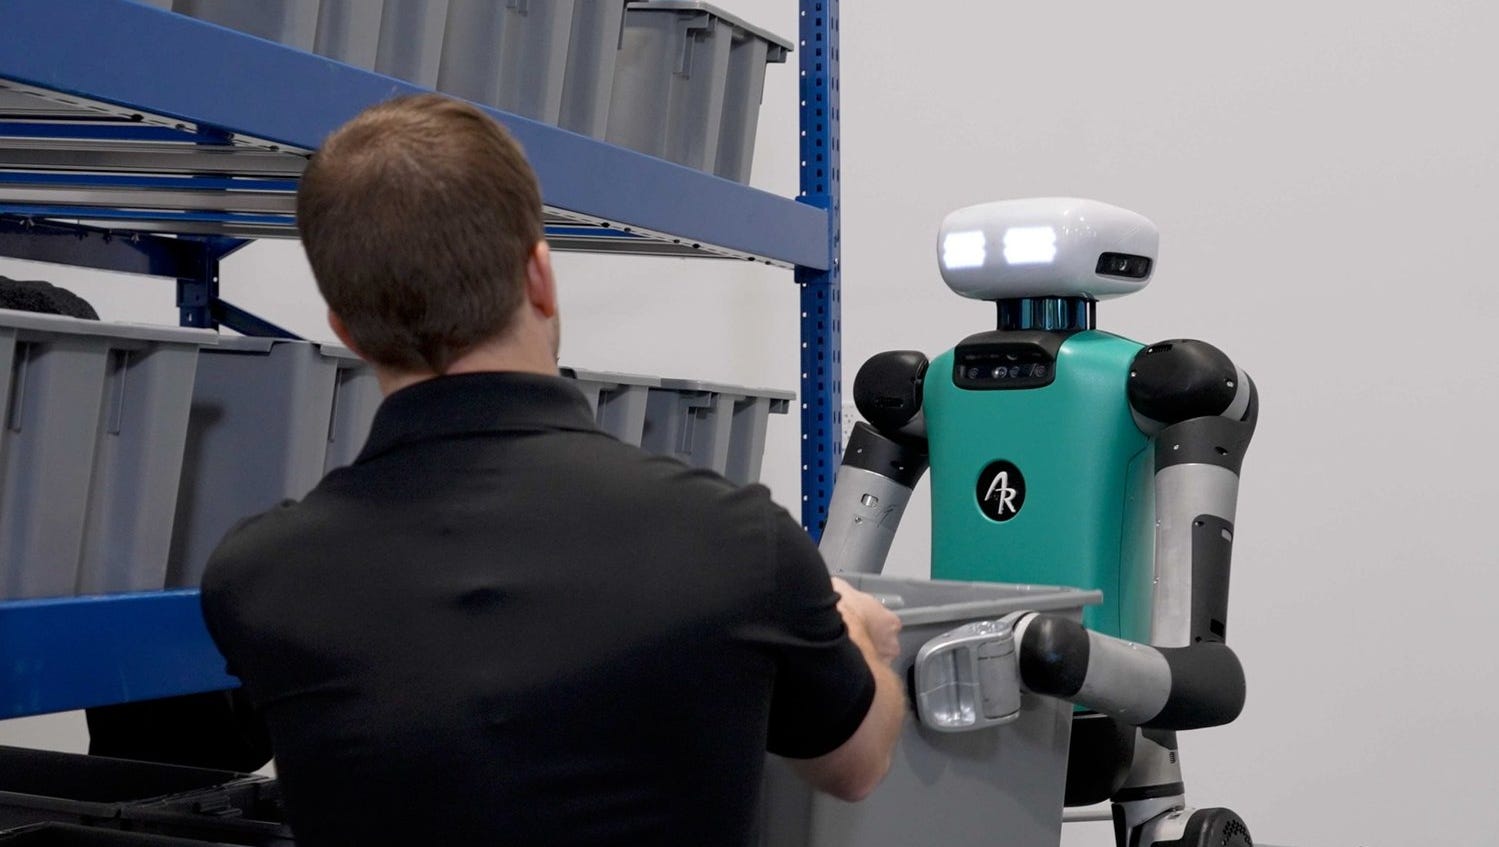  Agility Robotics to open world's 'first factory for humanoid robots' in Salem 